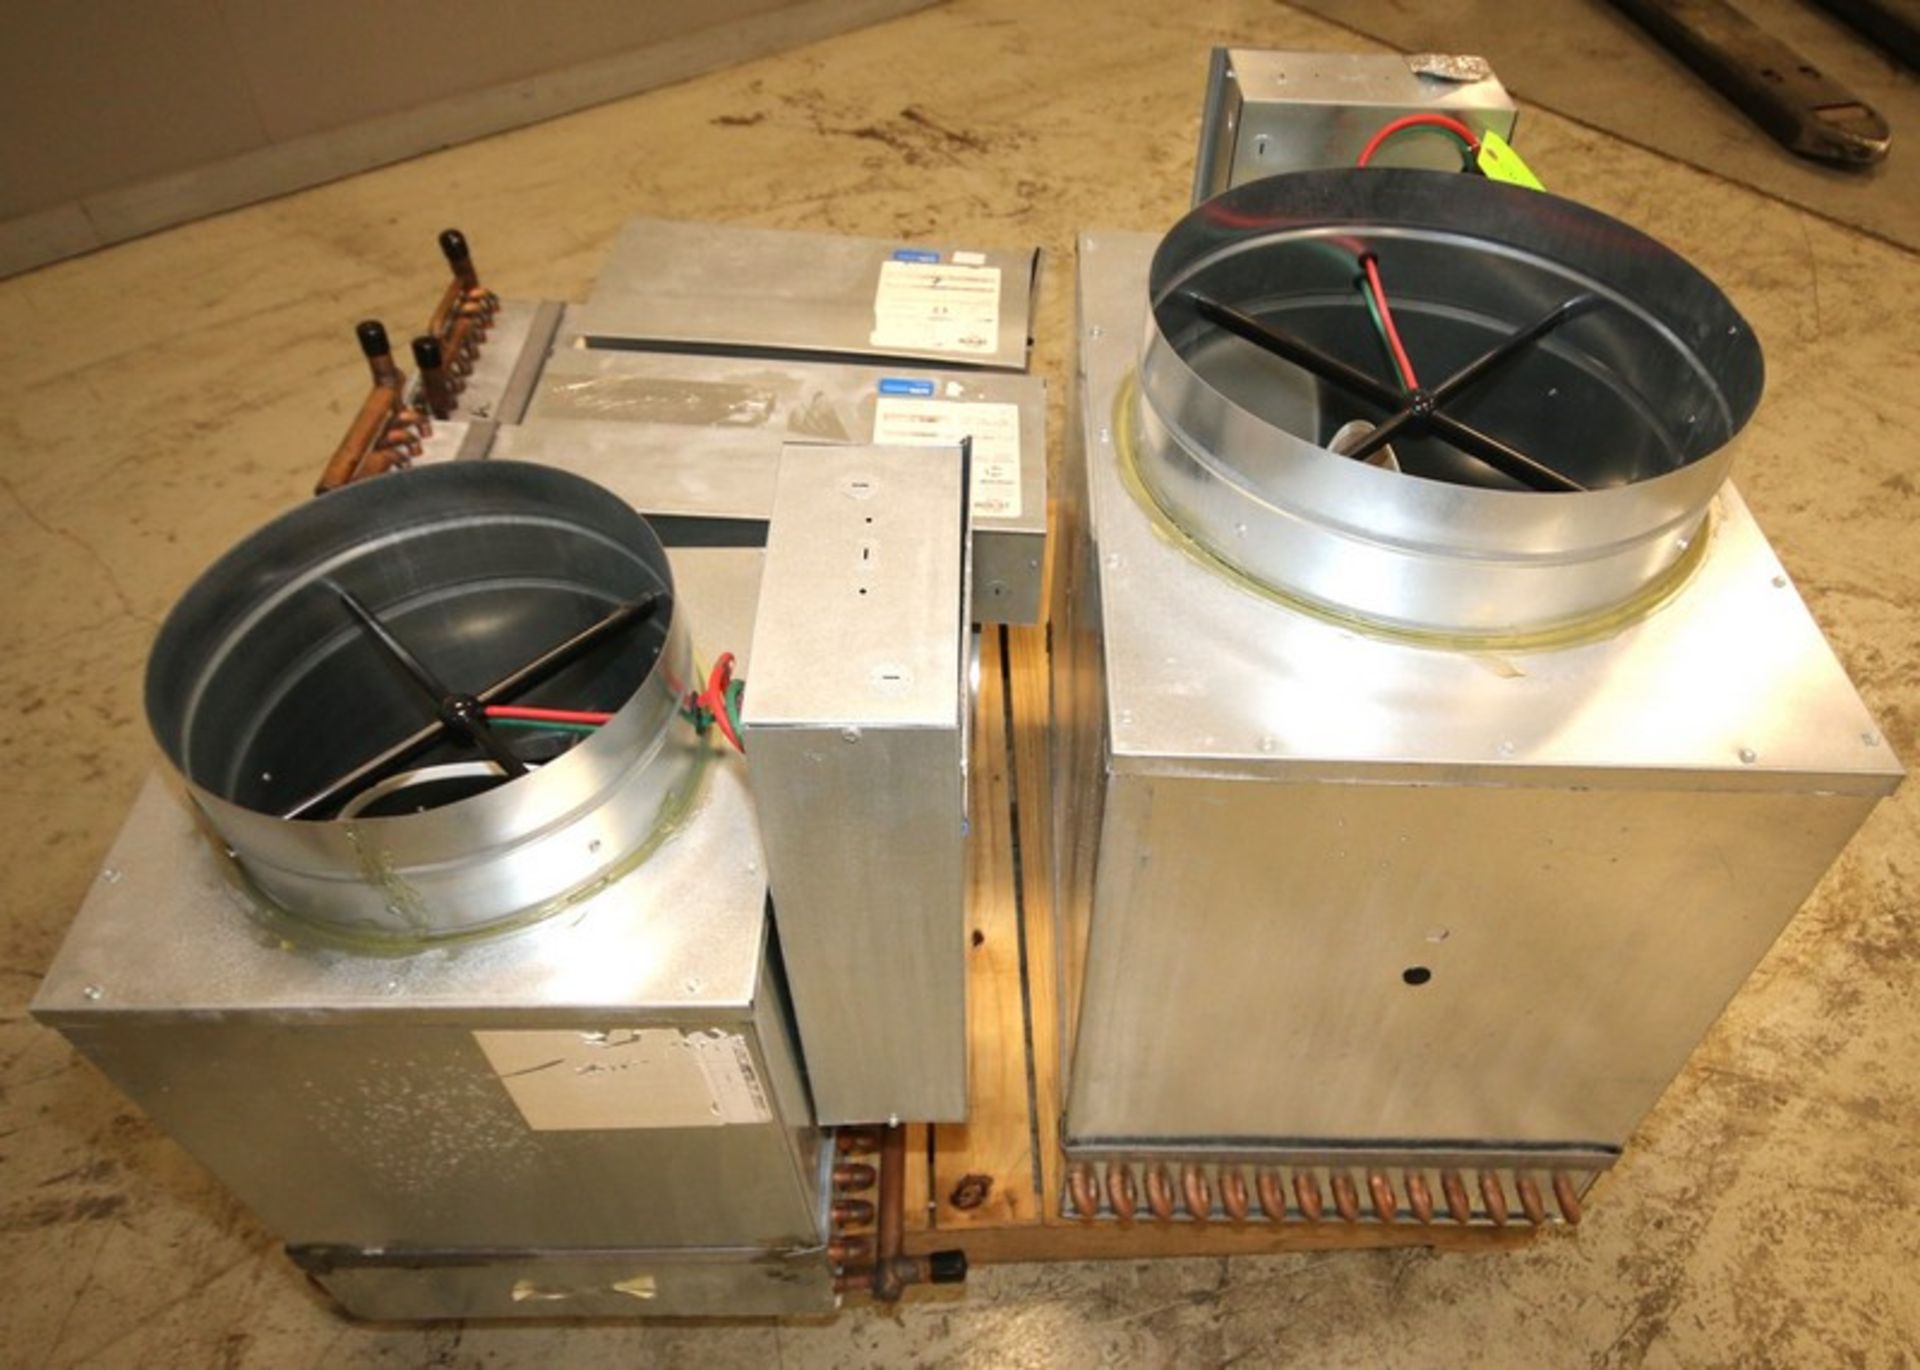 Lot of (4) Assorted Air Distribution / Price 16", 12", 8" & 10" Evaporator Coils, Order #560899, - Image 4 of 7